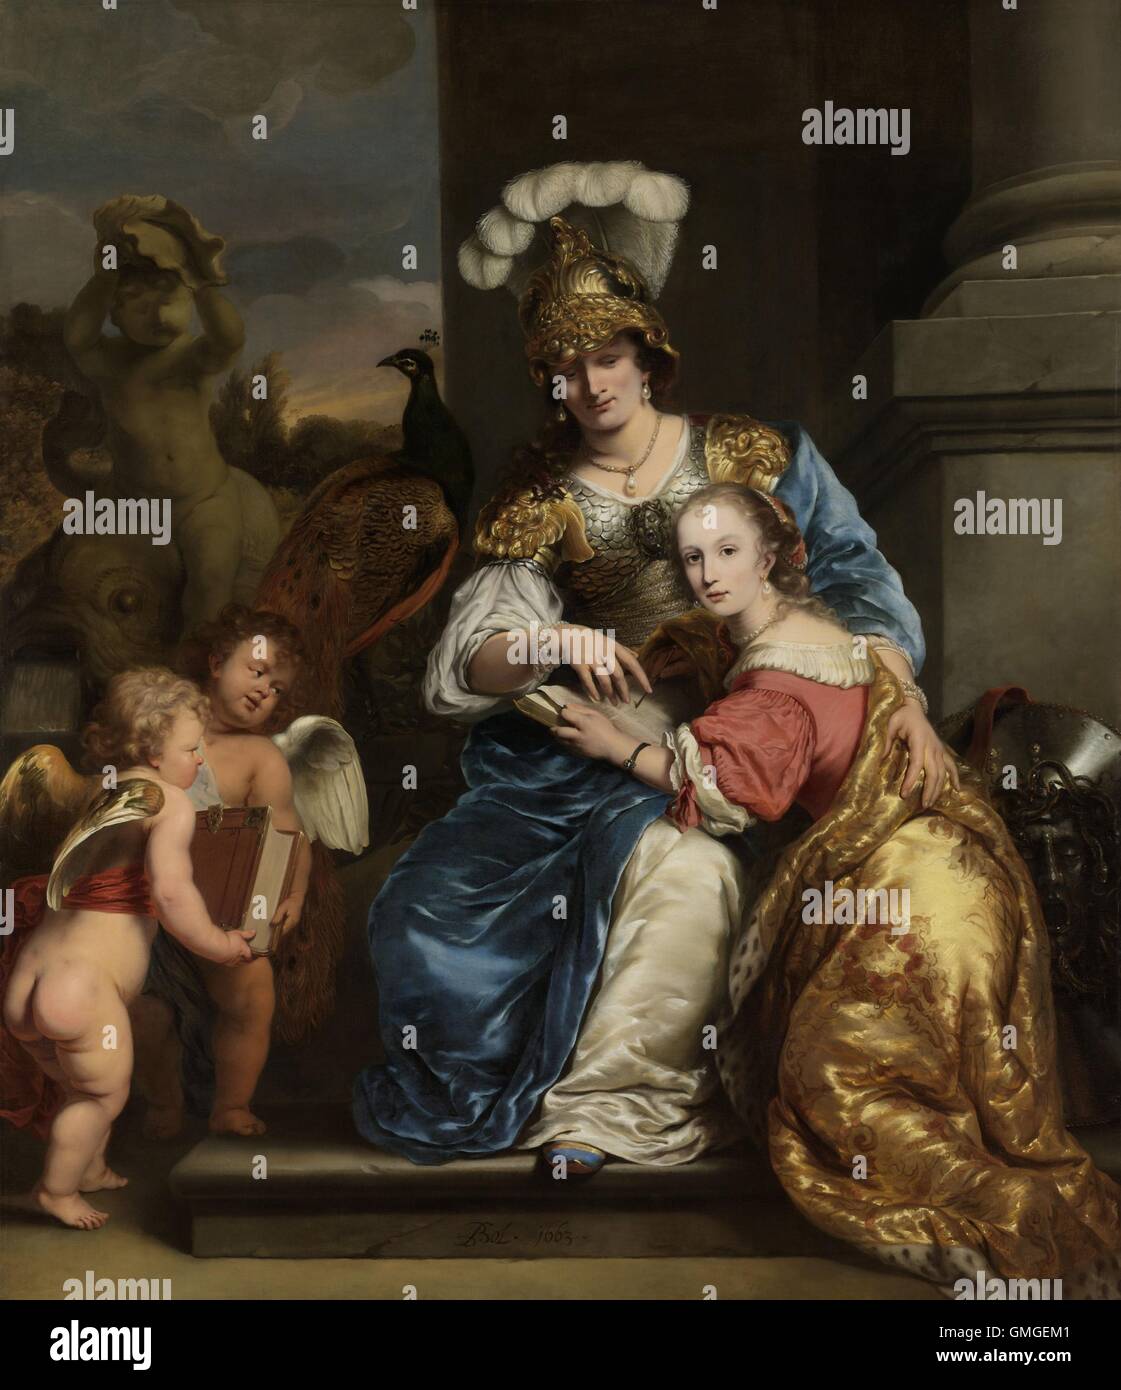 Margarita Trip as Minerva, Instructing her Sister Anna Maria Trip, by Ferdinand Bol, 1663, Dutch painting, oil on canvas. Two daughters of the wealthy, arms dealing, Trip family. In an allegorical portrait, the eldest is Minerva, goddess of art and scienc (BSLOC 2016 6 200) Stock Photo